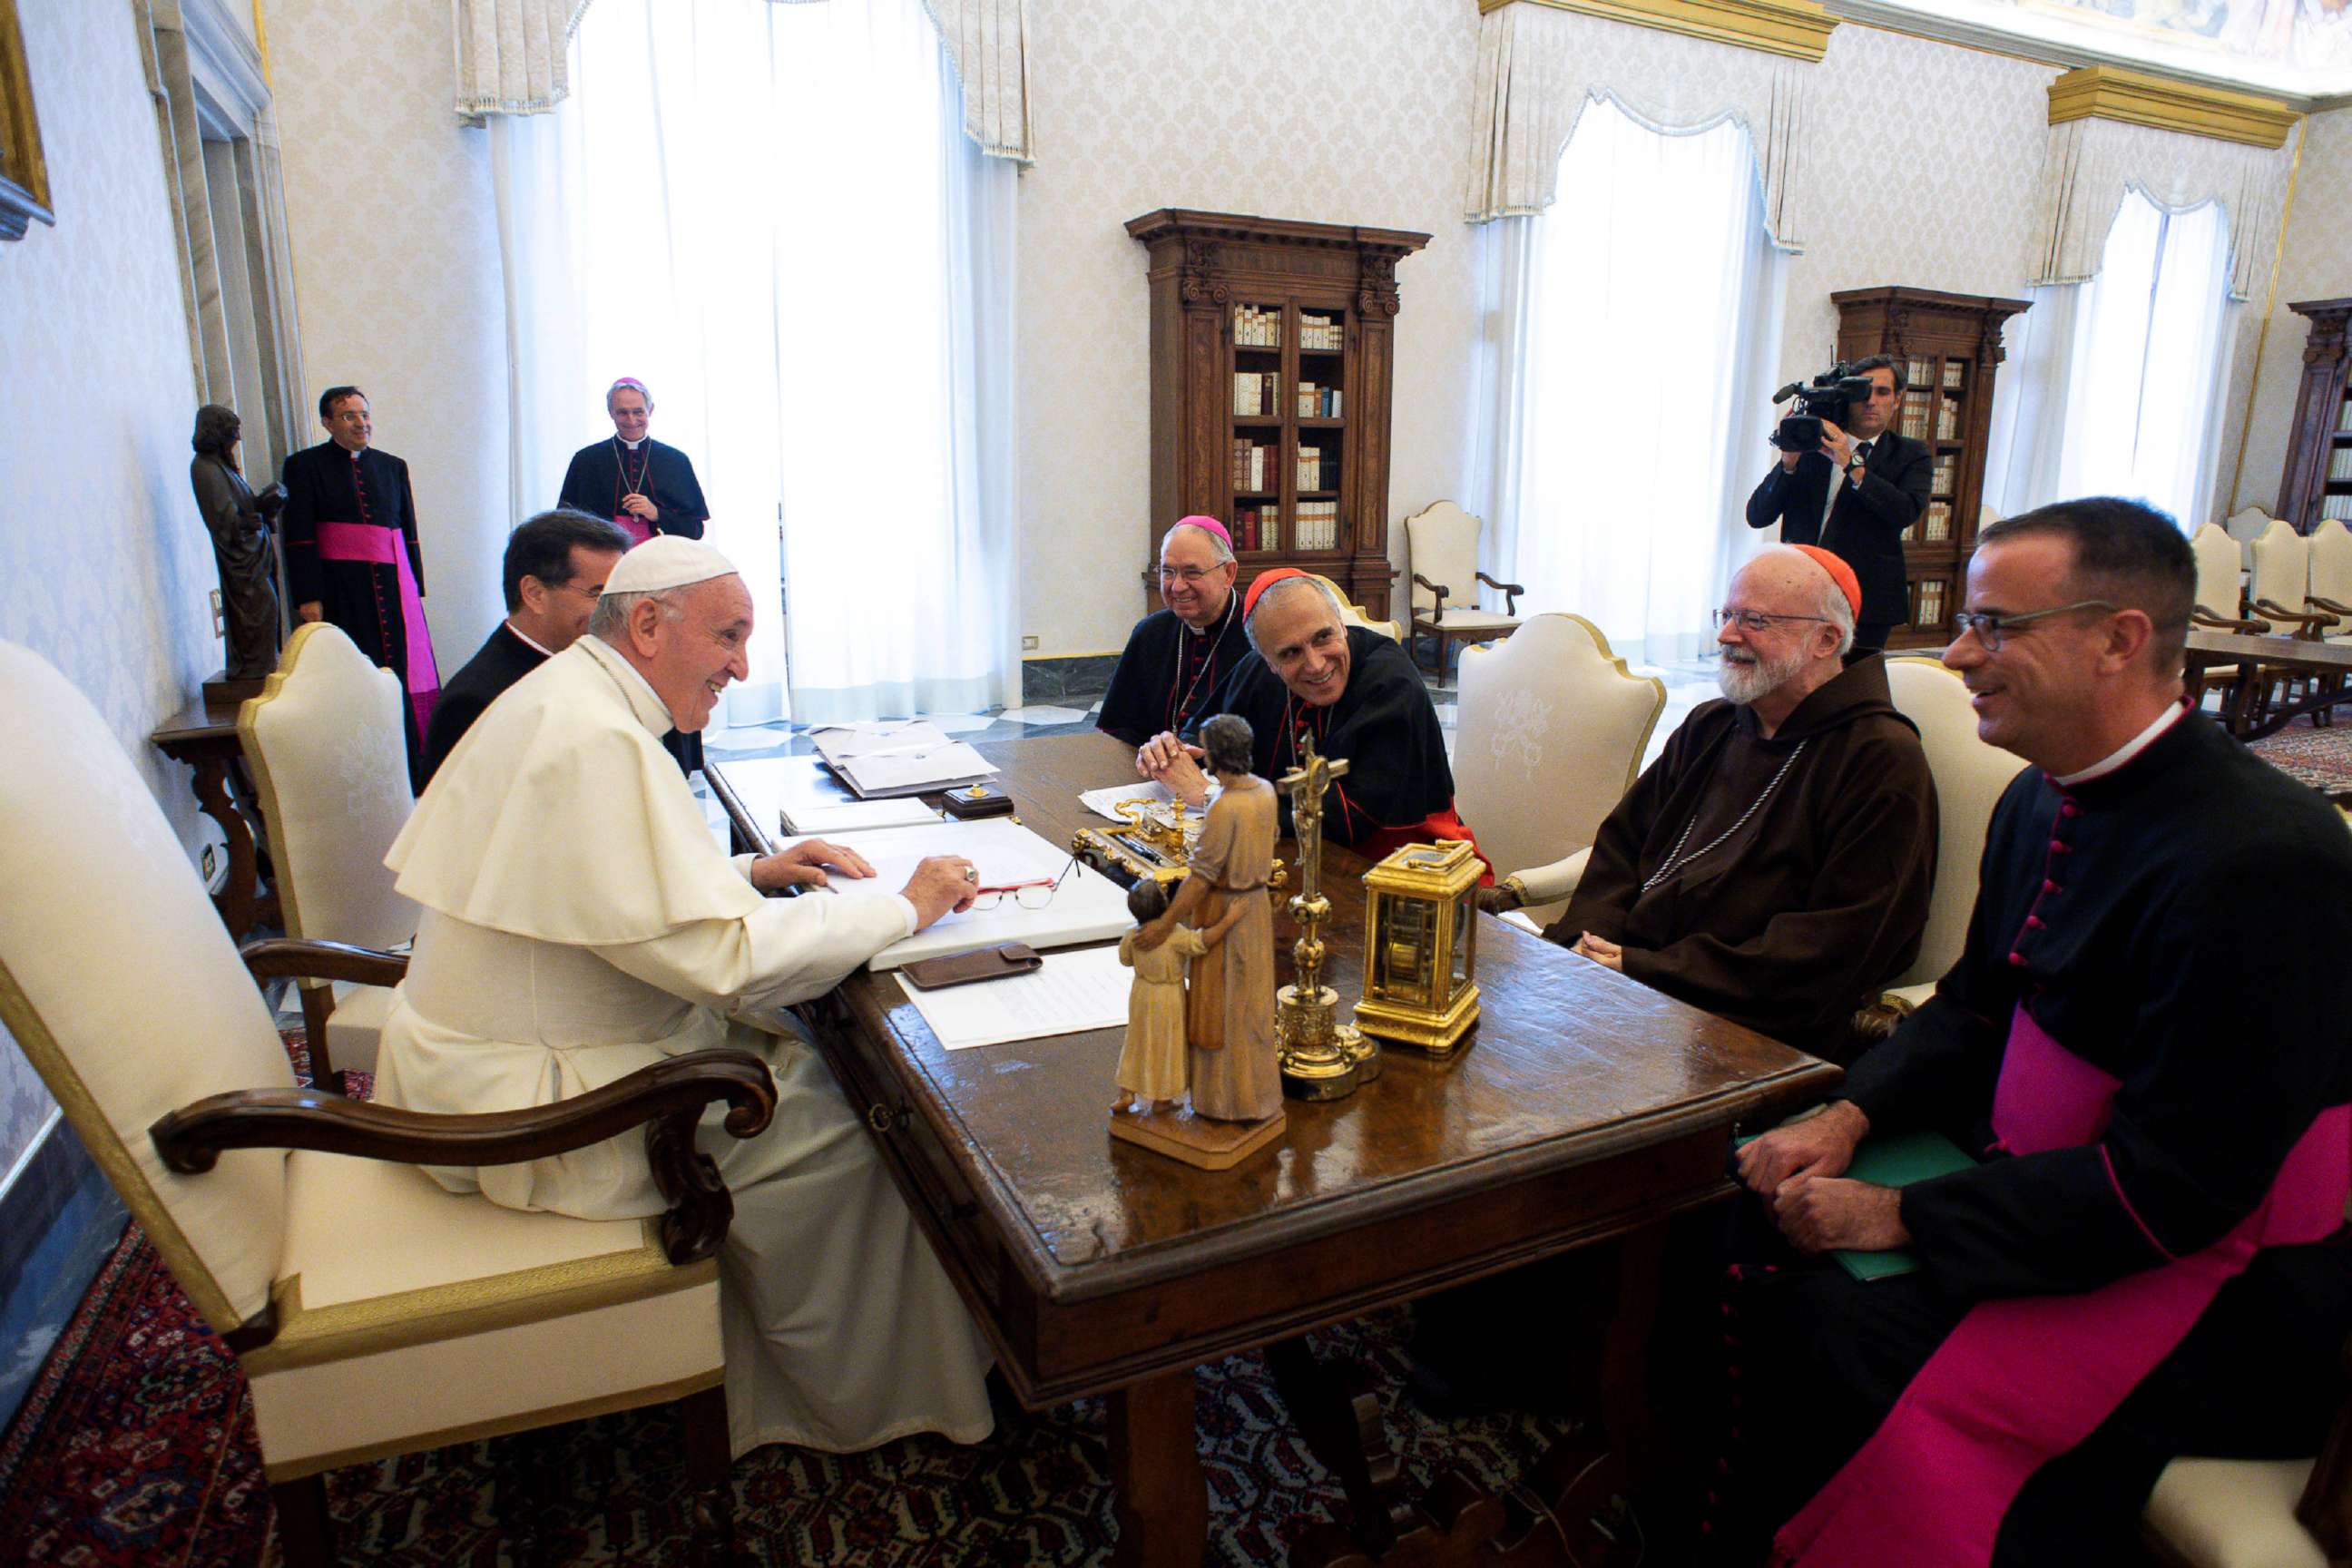 PHOTO: Pope Francis meets U.S. Catholic Church leaders and Monsignor Brian Bransfield, General Secretary of the United States Conference of Catholic Bishops, during a private audience at the Vatican, Sept.13, 2018.